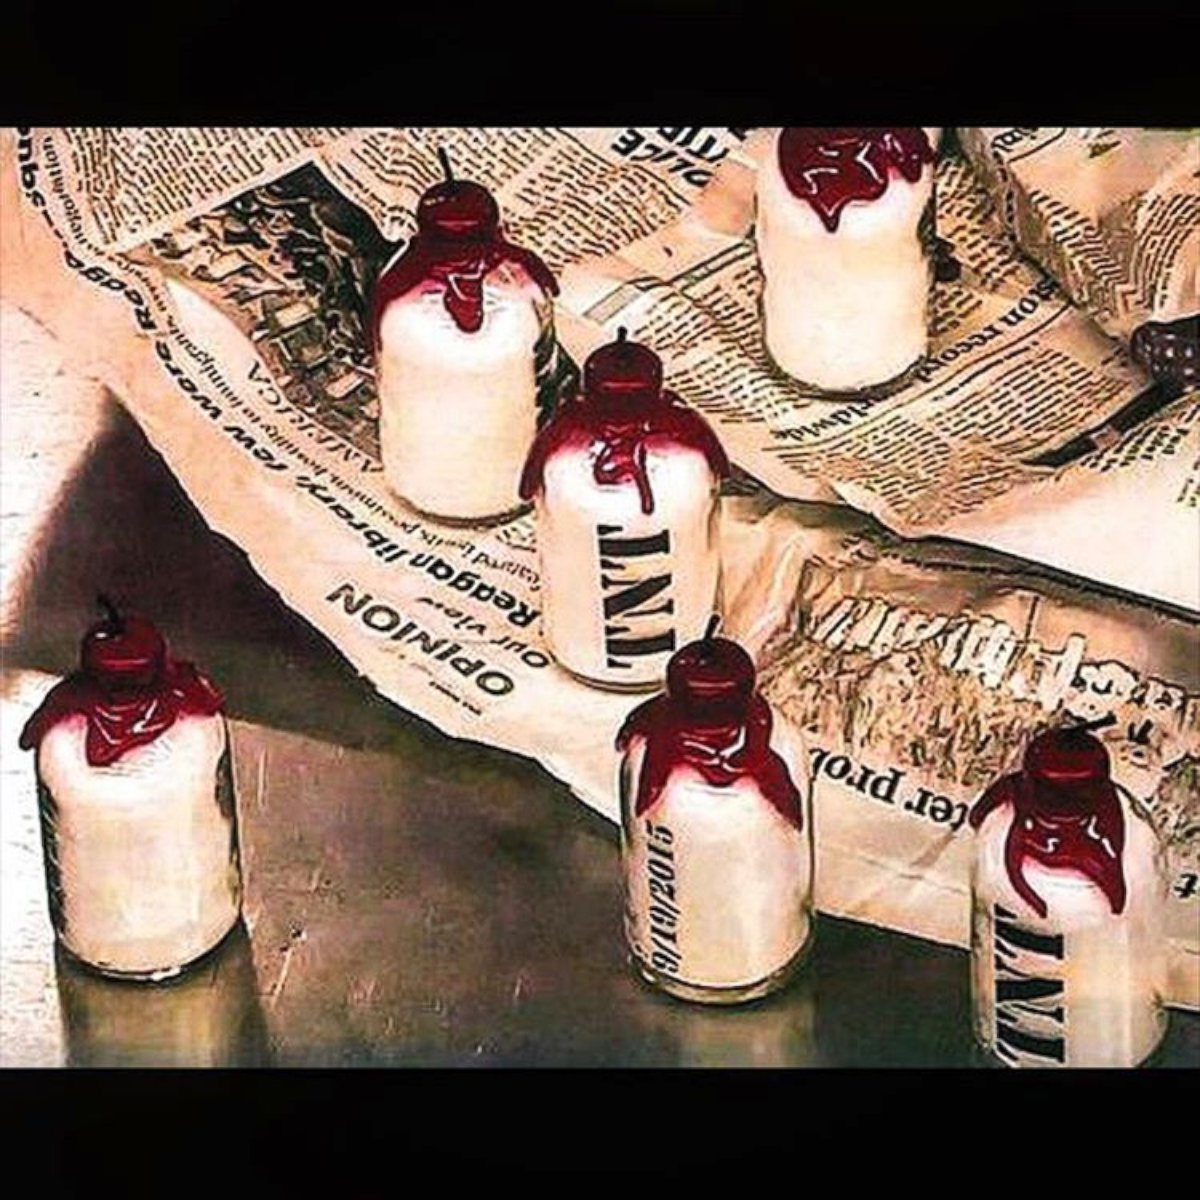 PHOTO: These spoof-explosives were just wedding favors, but they sparked a 20-minute evacuation at the Denver International Airport. 